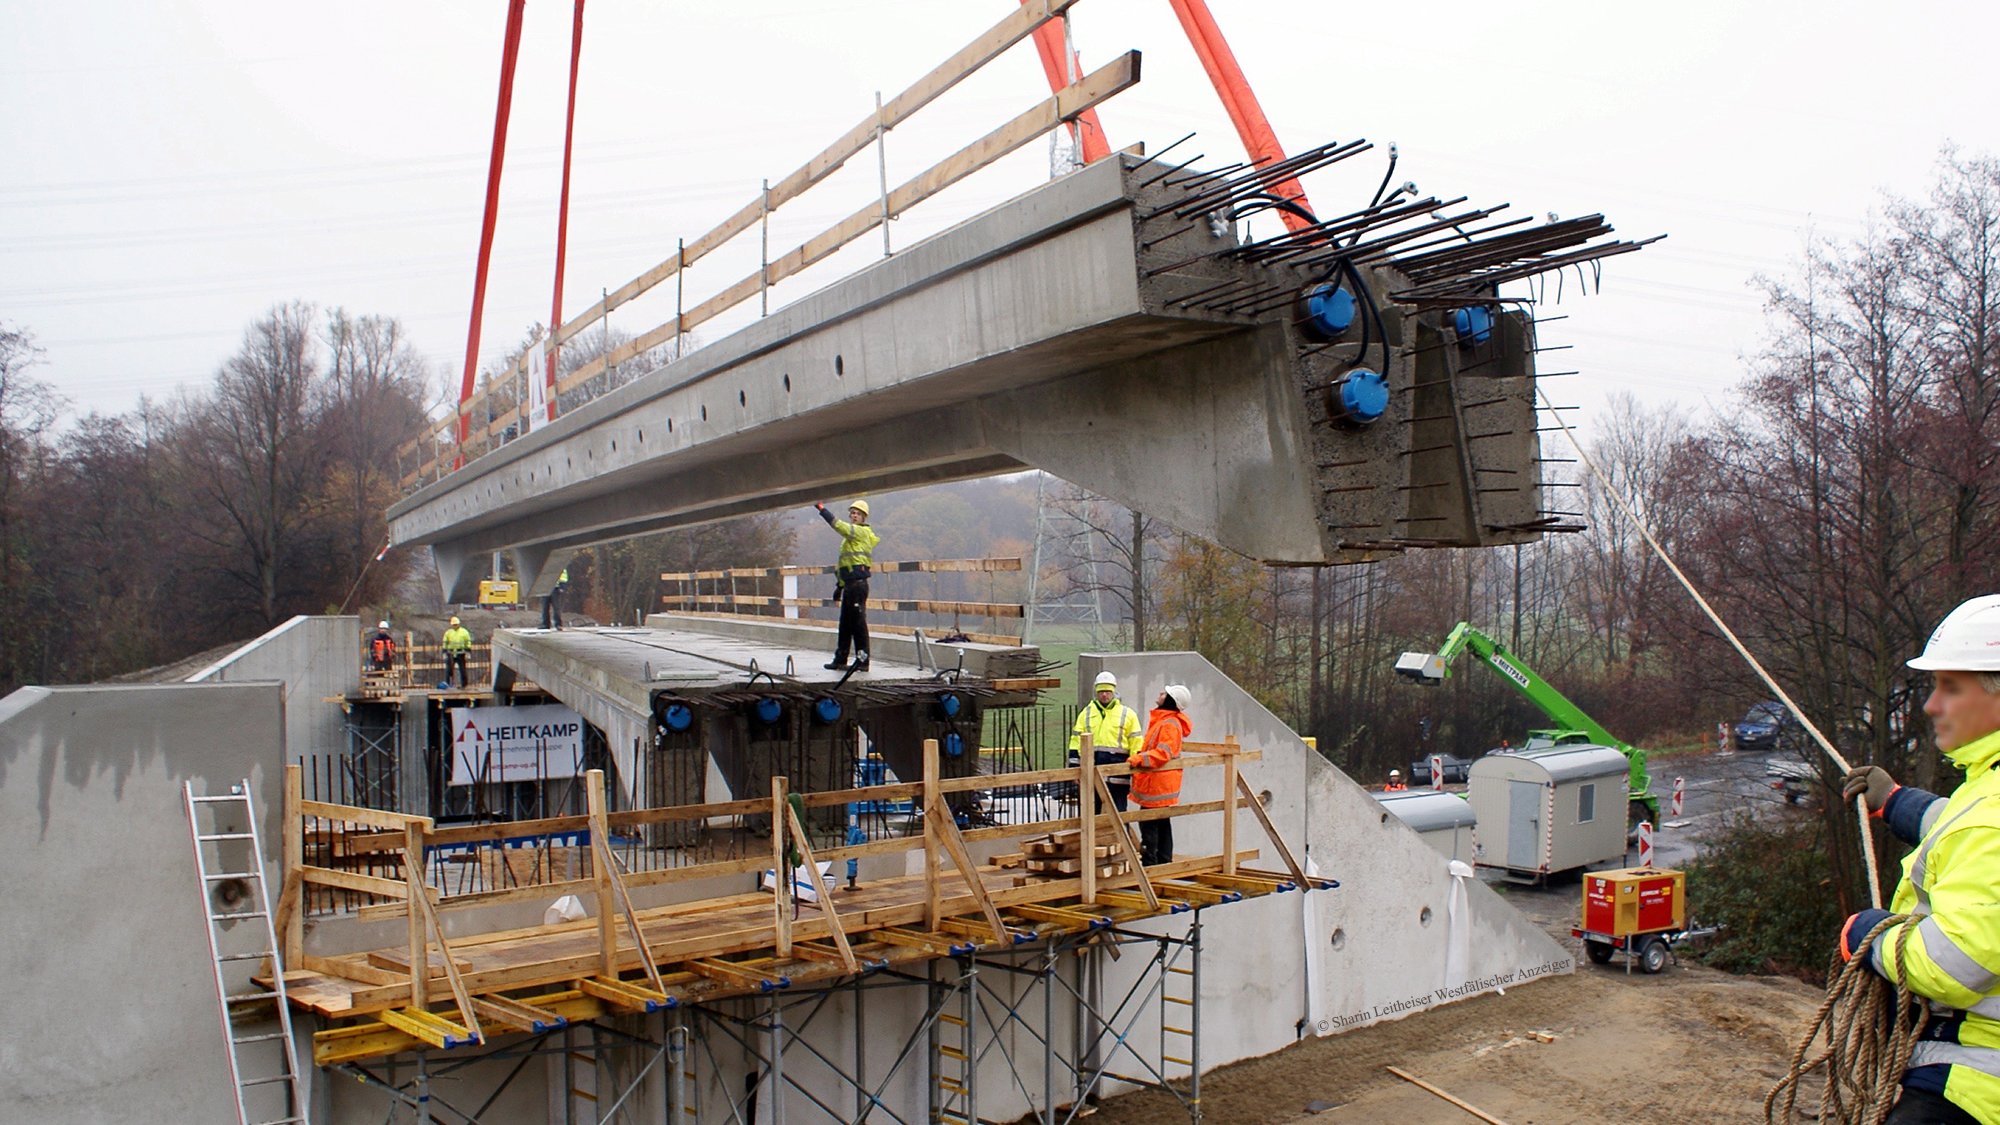 Construction of the prefabricated components of the modular bridge system.